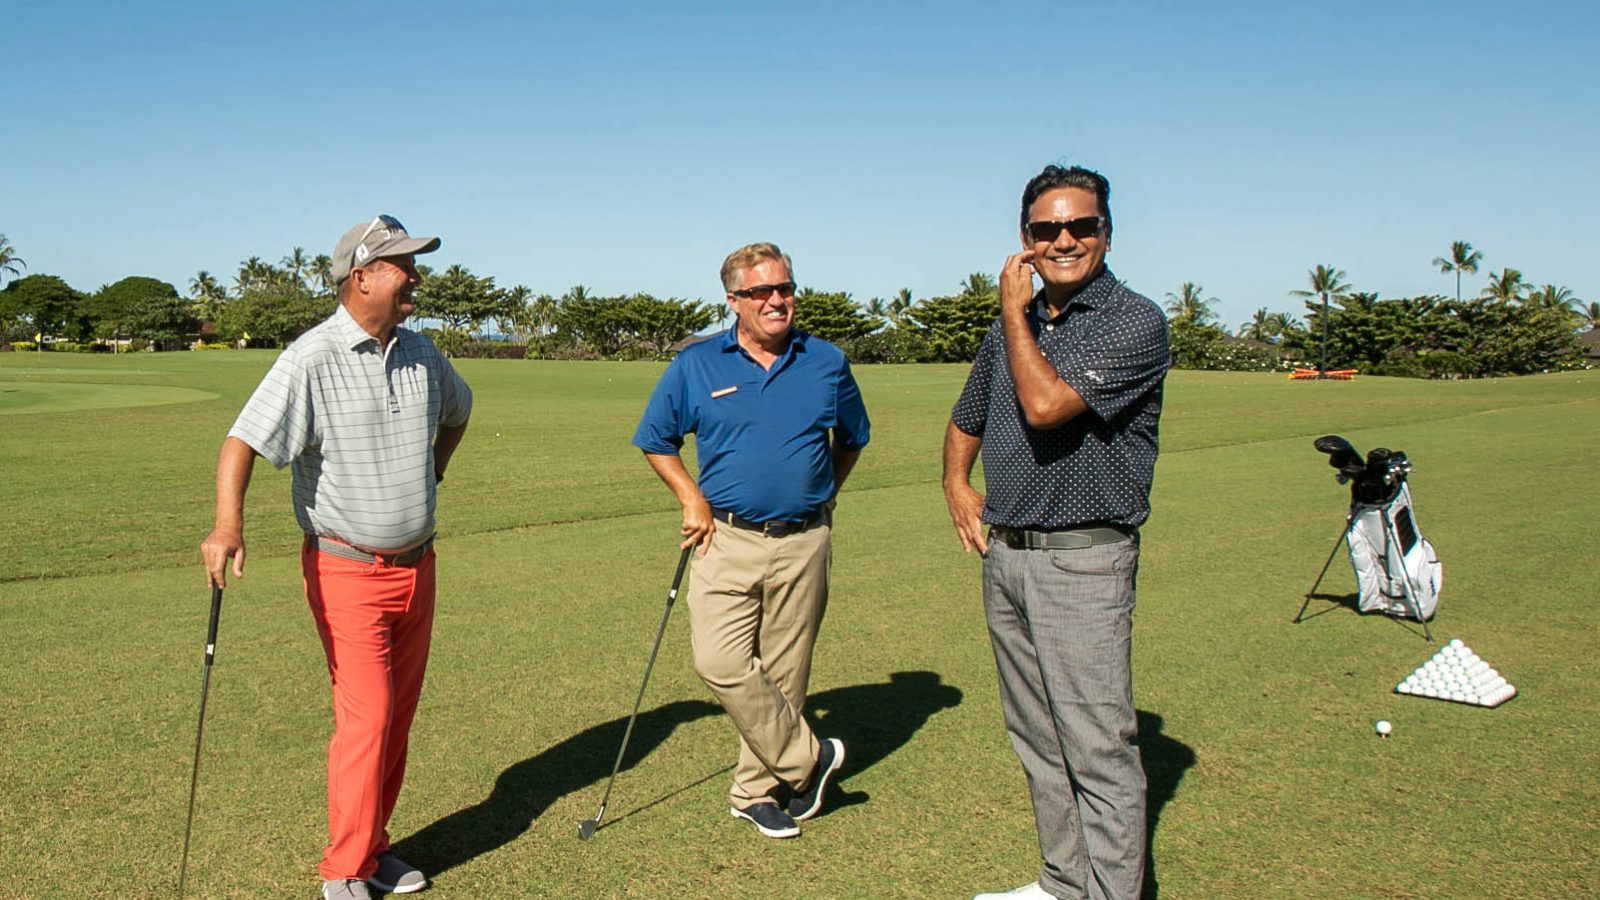 Three Golf pros standing on golf course smiling